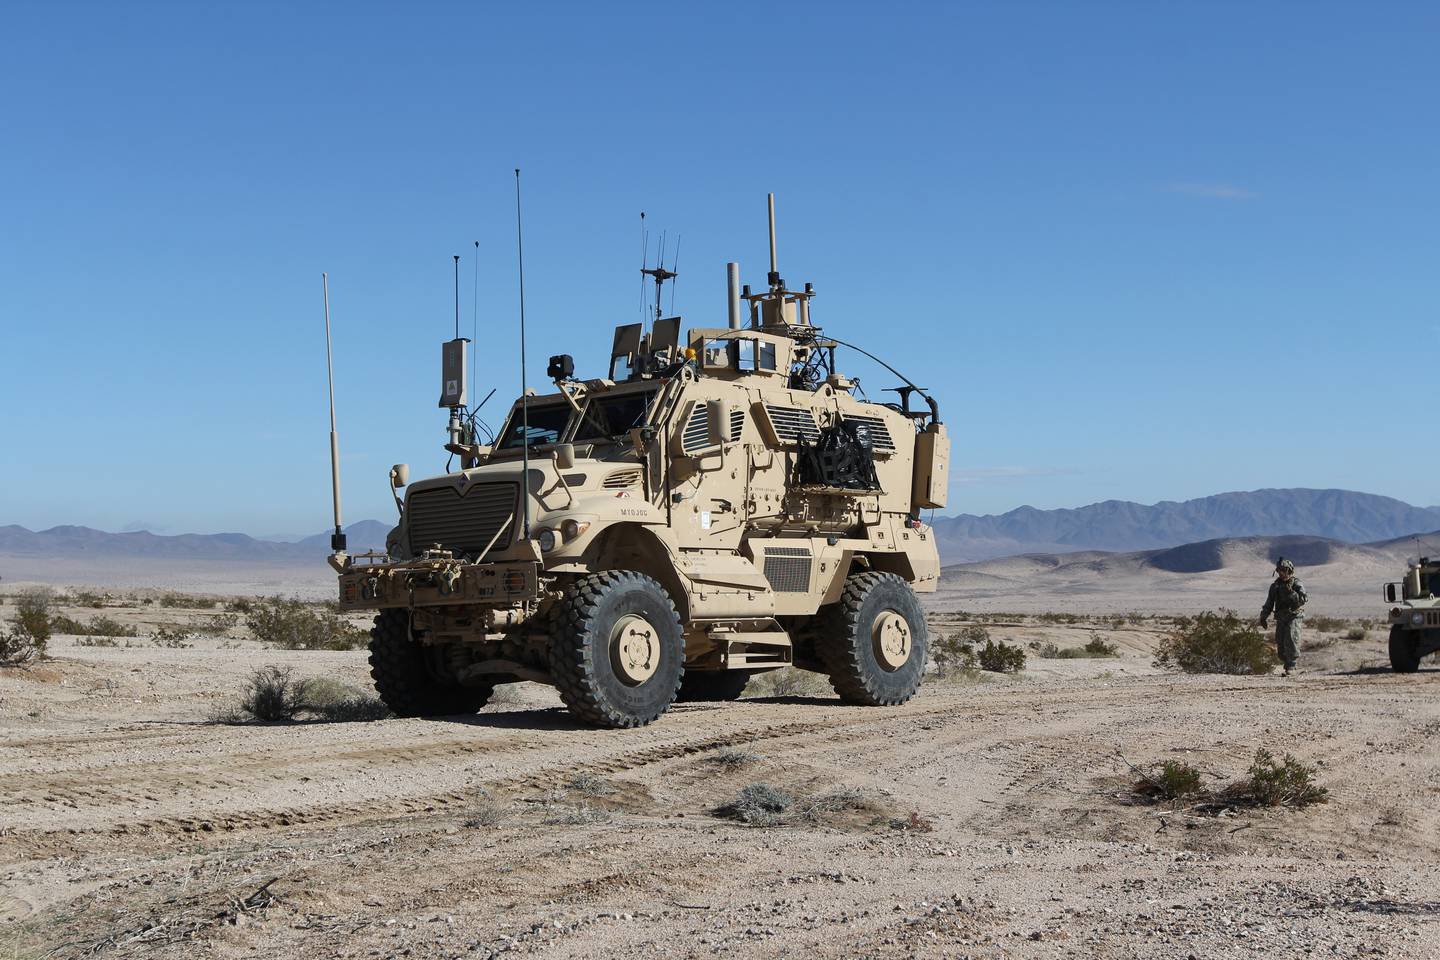 An Electronic Warfare Tactical Vehicle supports training for the 3rd Brigade Combat Team, 1st Cavalry Division, at the National Training Center in January 2019.